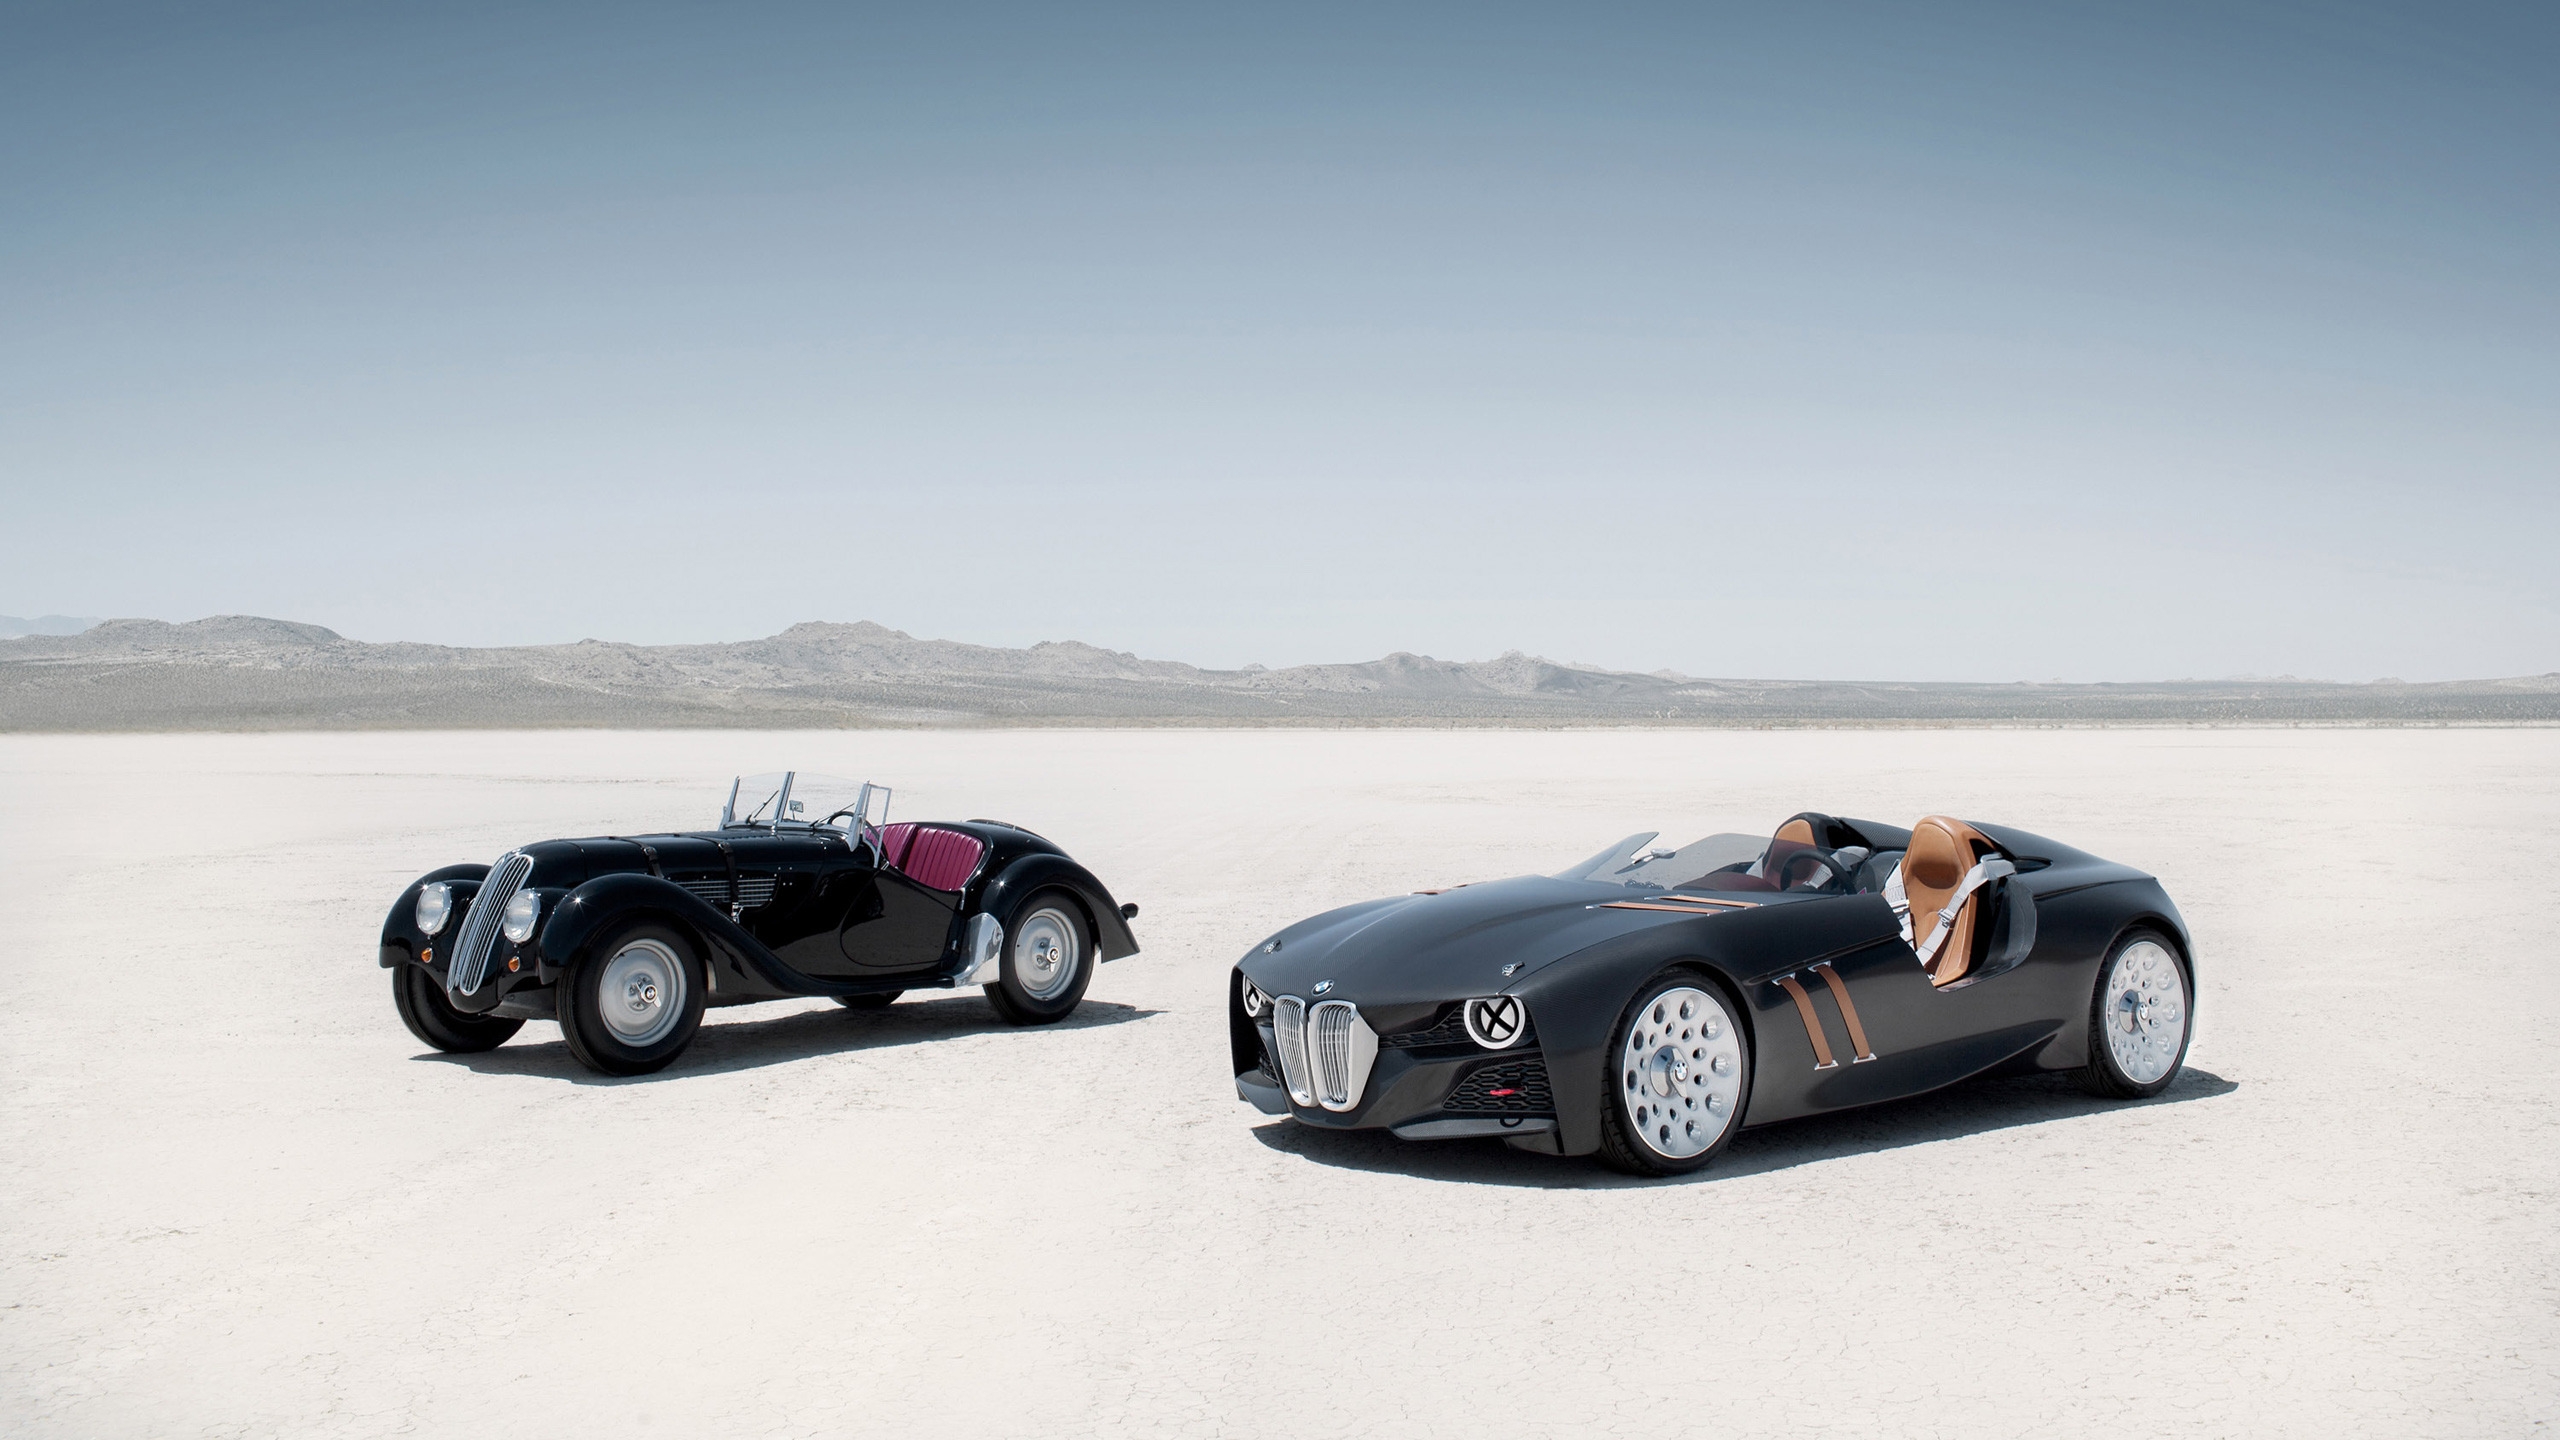 BMW 328 Hommage Old and New for 2560x1440 HDTV resolution